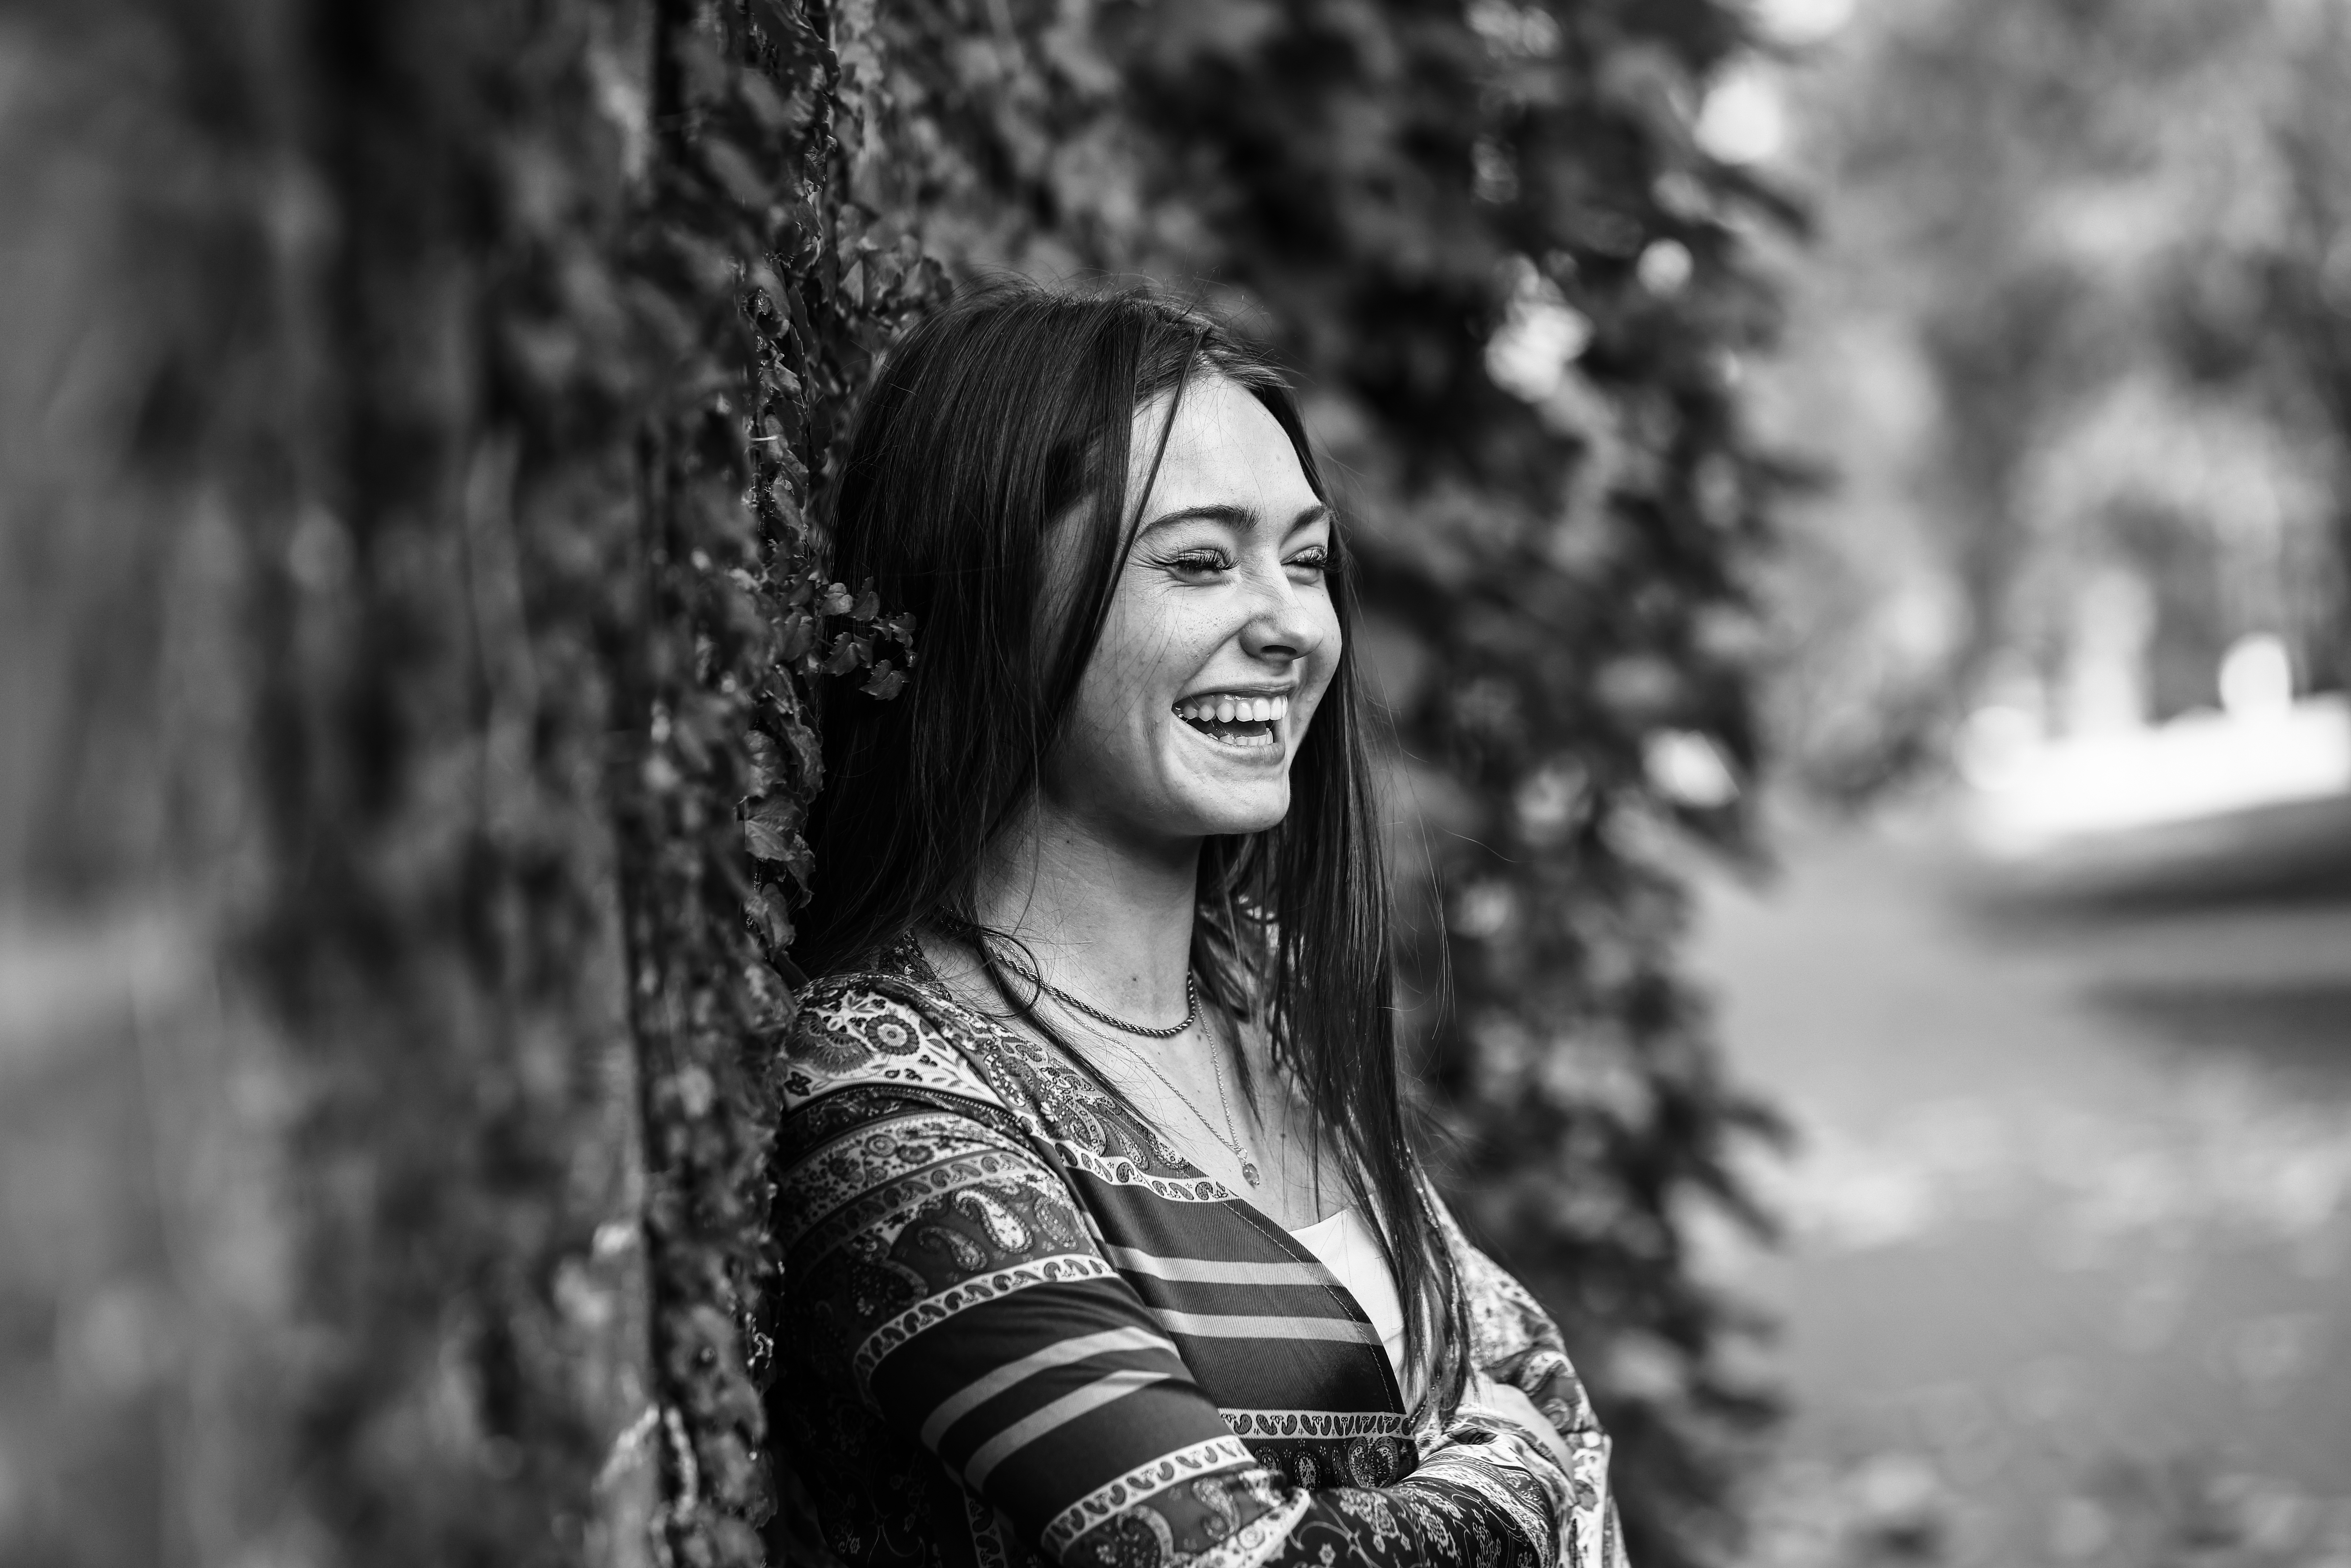 A young woman outside, laughing, while leaning against a brick wall covered in ivy.